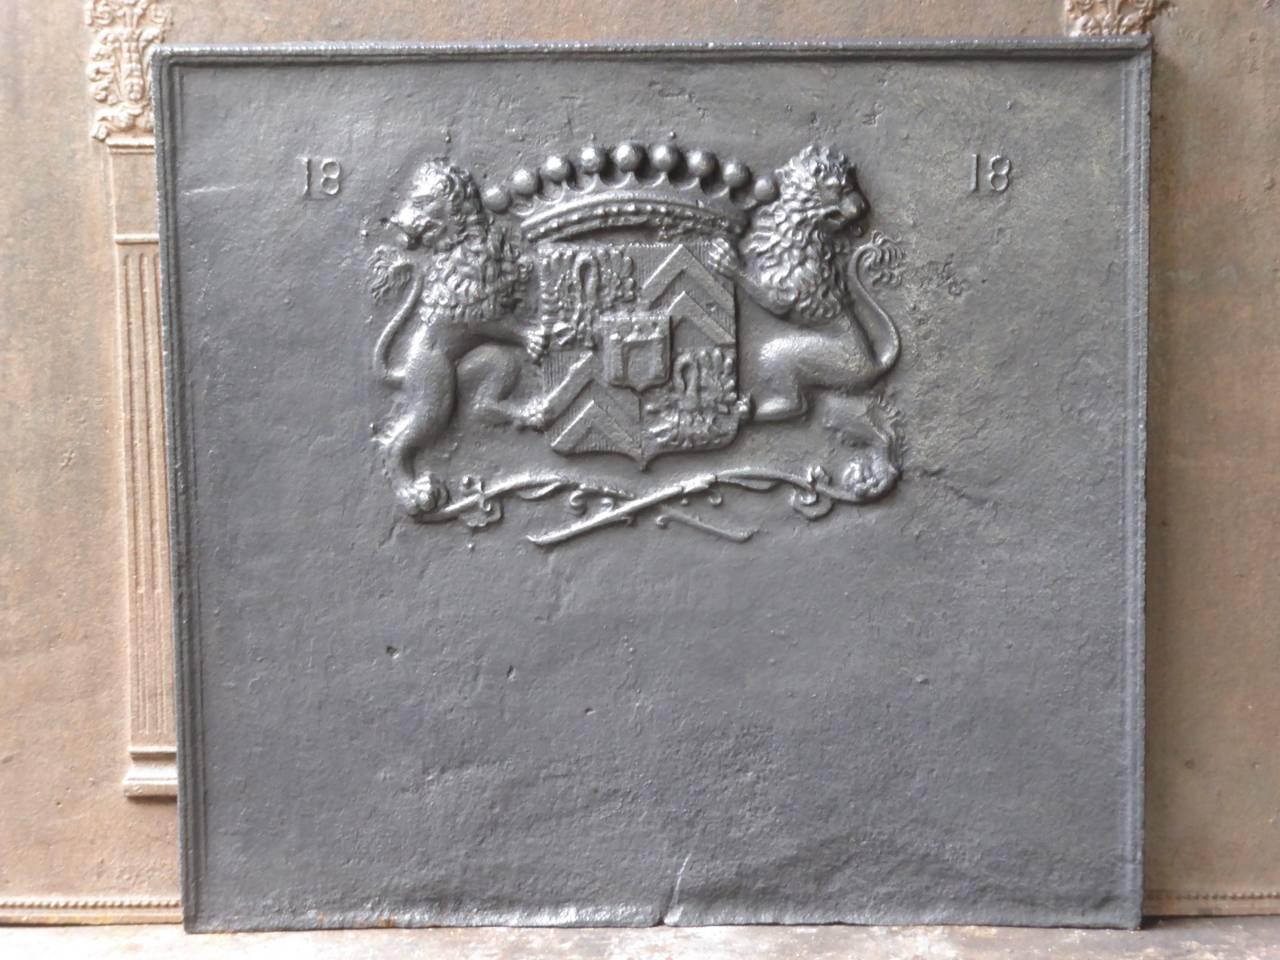 French fireback with a coat of arms and the date of production 1818. It is an unknown coat of arms. The crown suggests royalty.